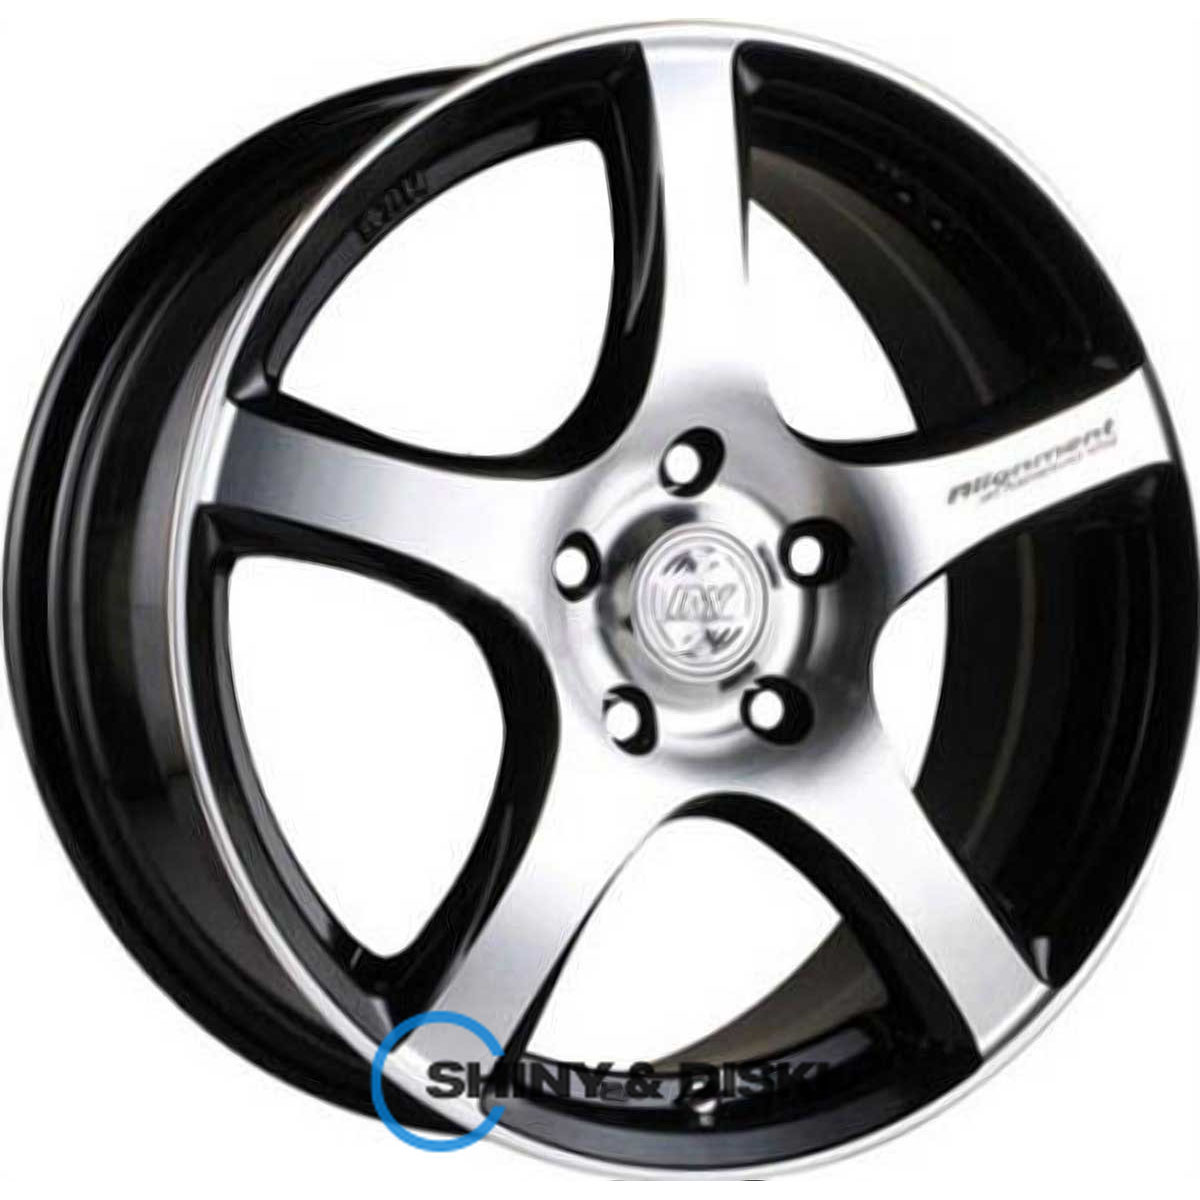 rs tuning h-531 bkfp r16 w7 pcd4x114.3 et40 dia67.1